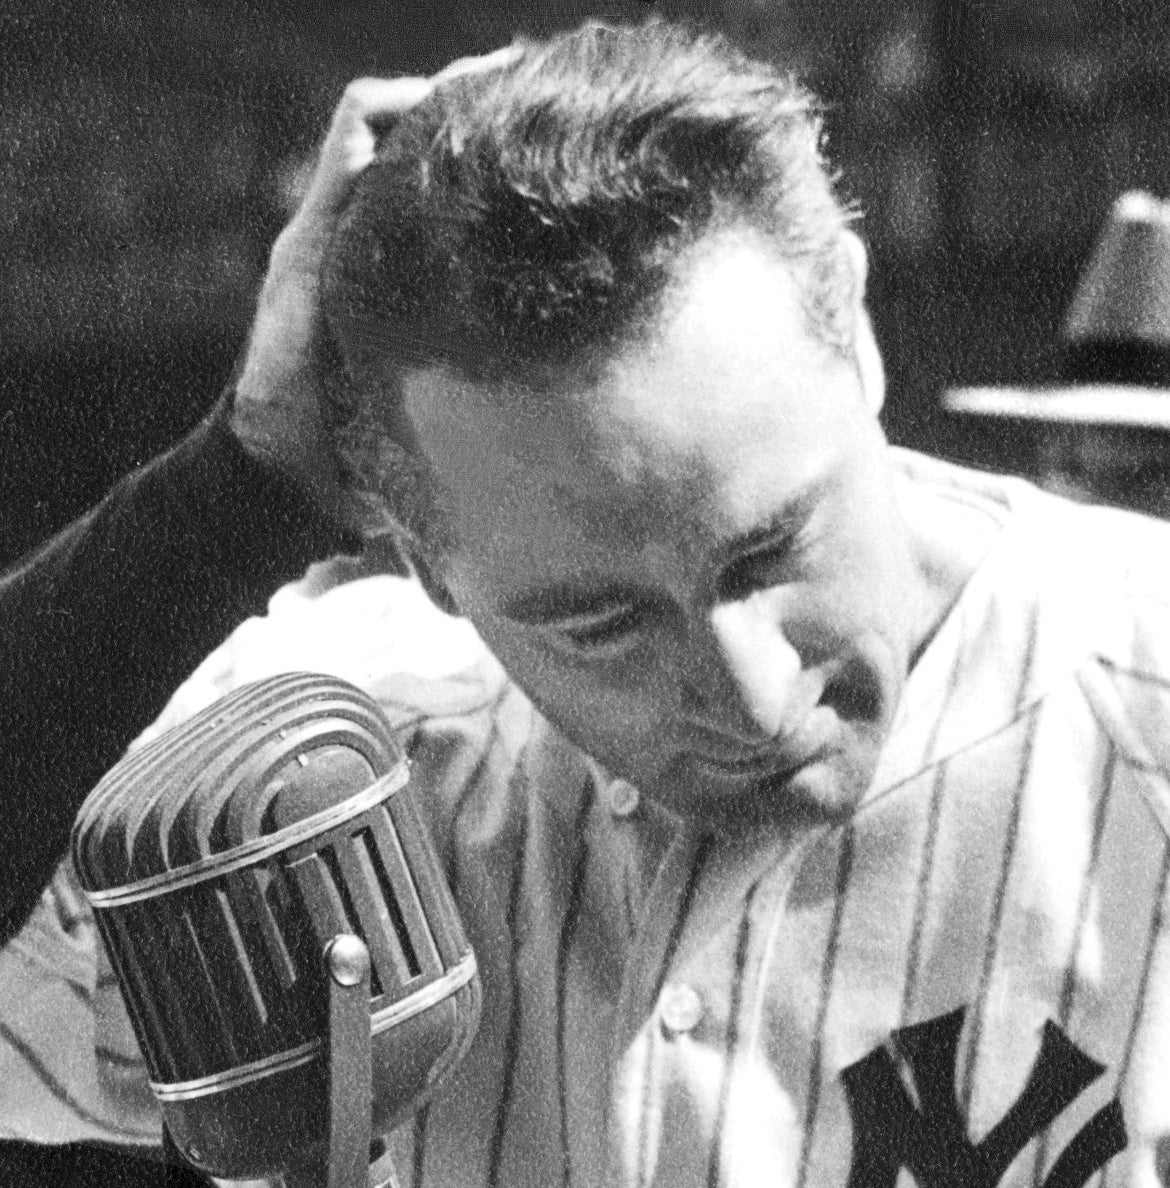 Lou Gehrig at a microphone